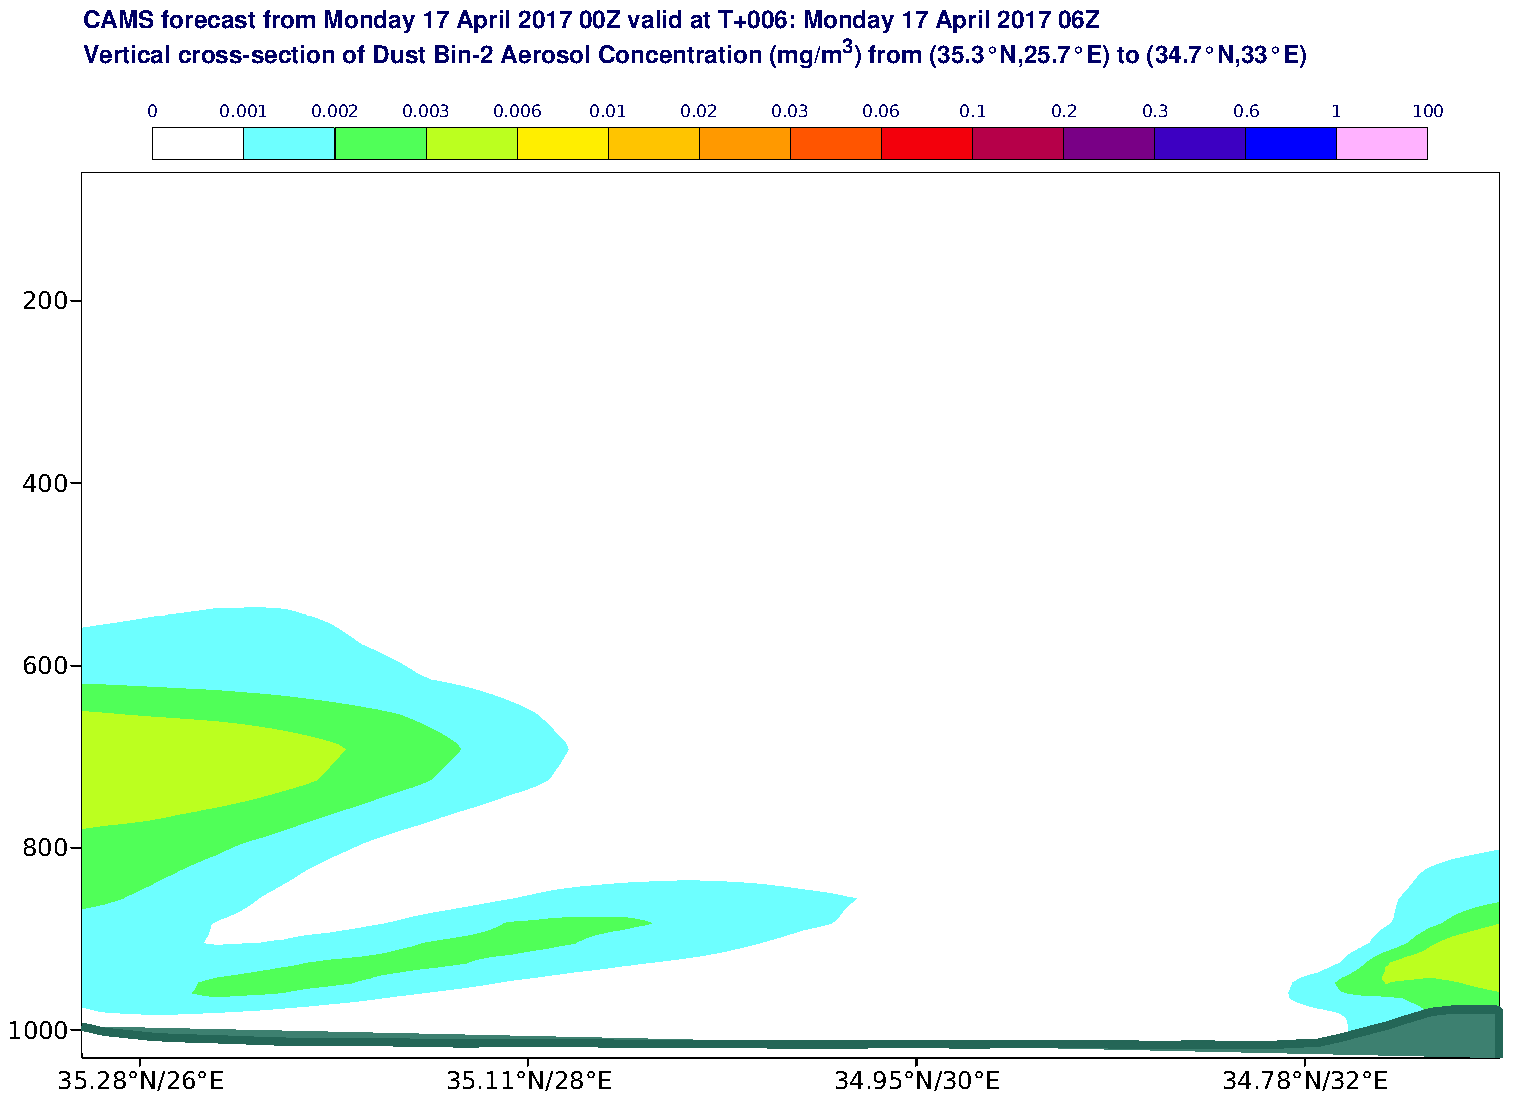 Vertical cross-section of Dust Bin-2 Aerosol Concentration (mg/m3) valid at T6 - 2017-04-17 06:00